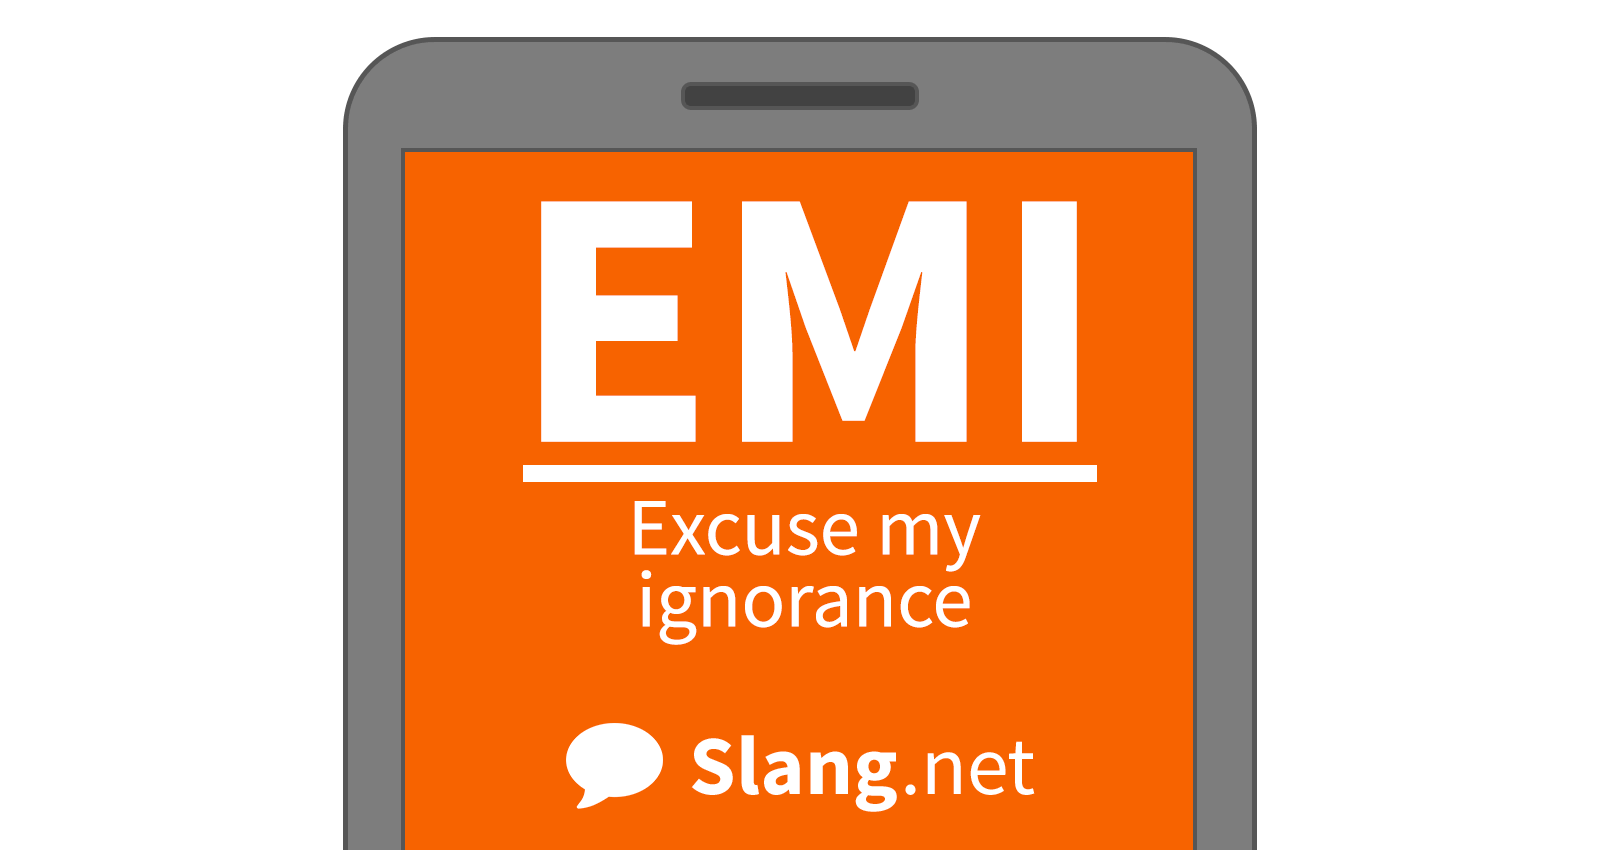 People will likely use EMI in online forums and messages